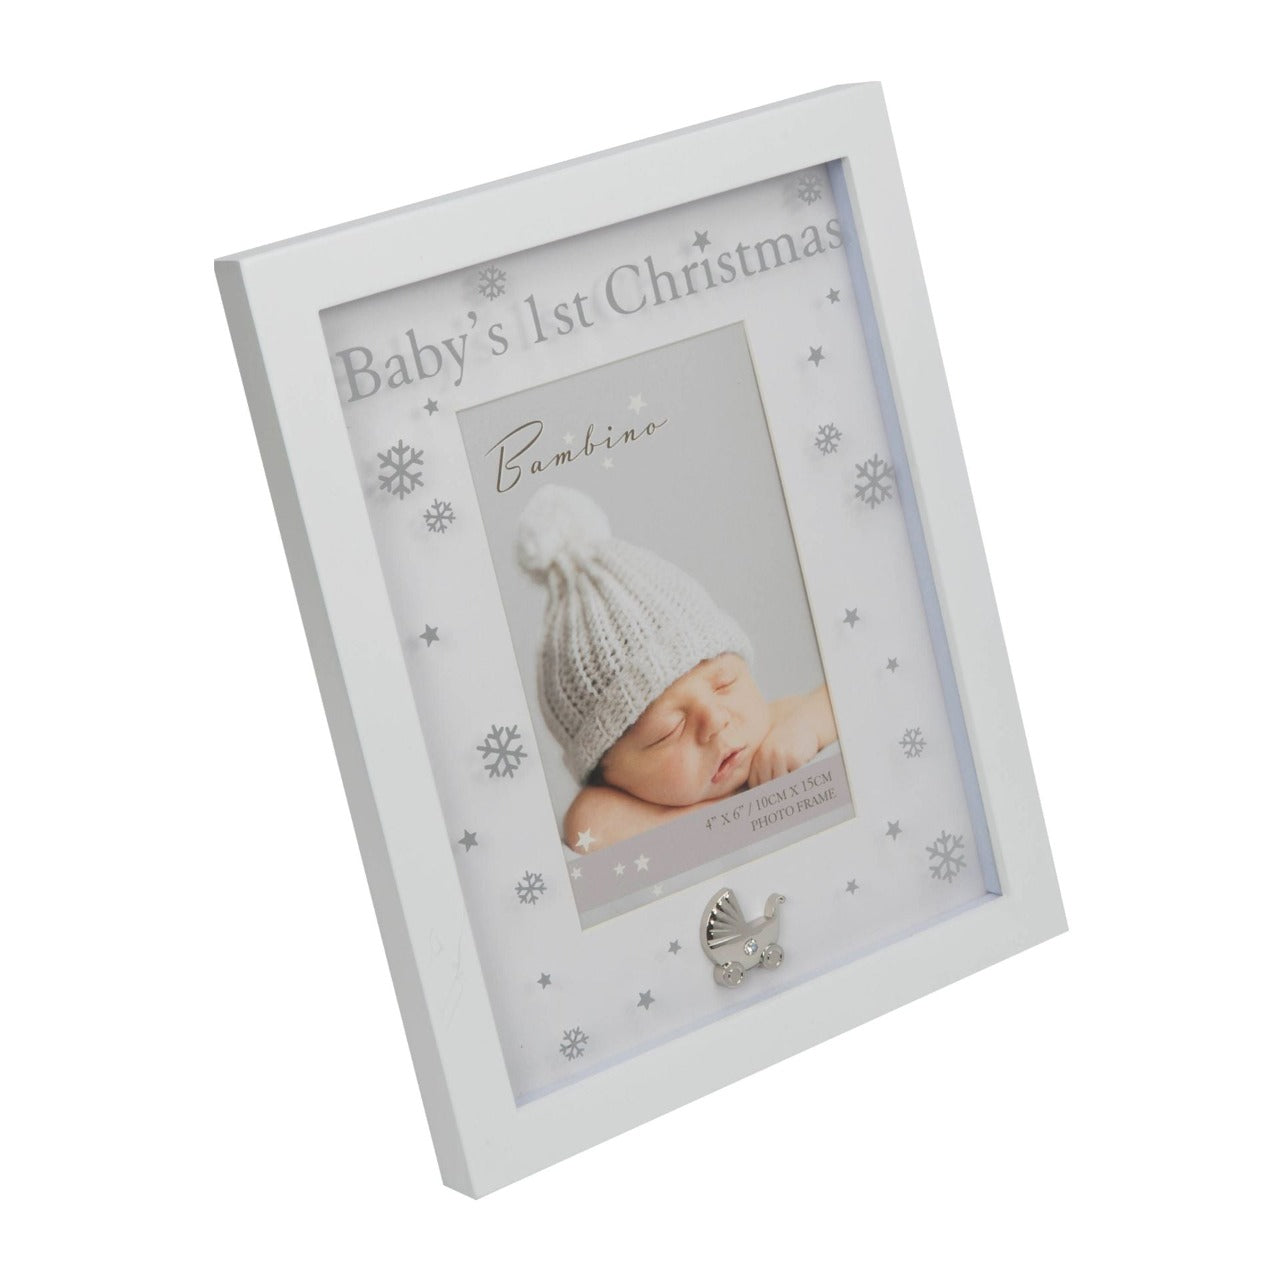 Bambino Baby’s 1st Christmas Photo  Frame 4" x 6"  A Baby’s 1st Christmas photo frame from BAMBINO BY JULIANA®.  This gorgeous festive frame will melt hearts as quickly as the snowflakes upon it.